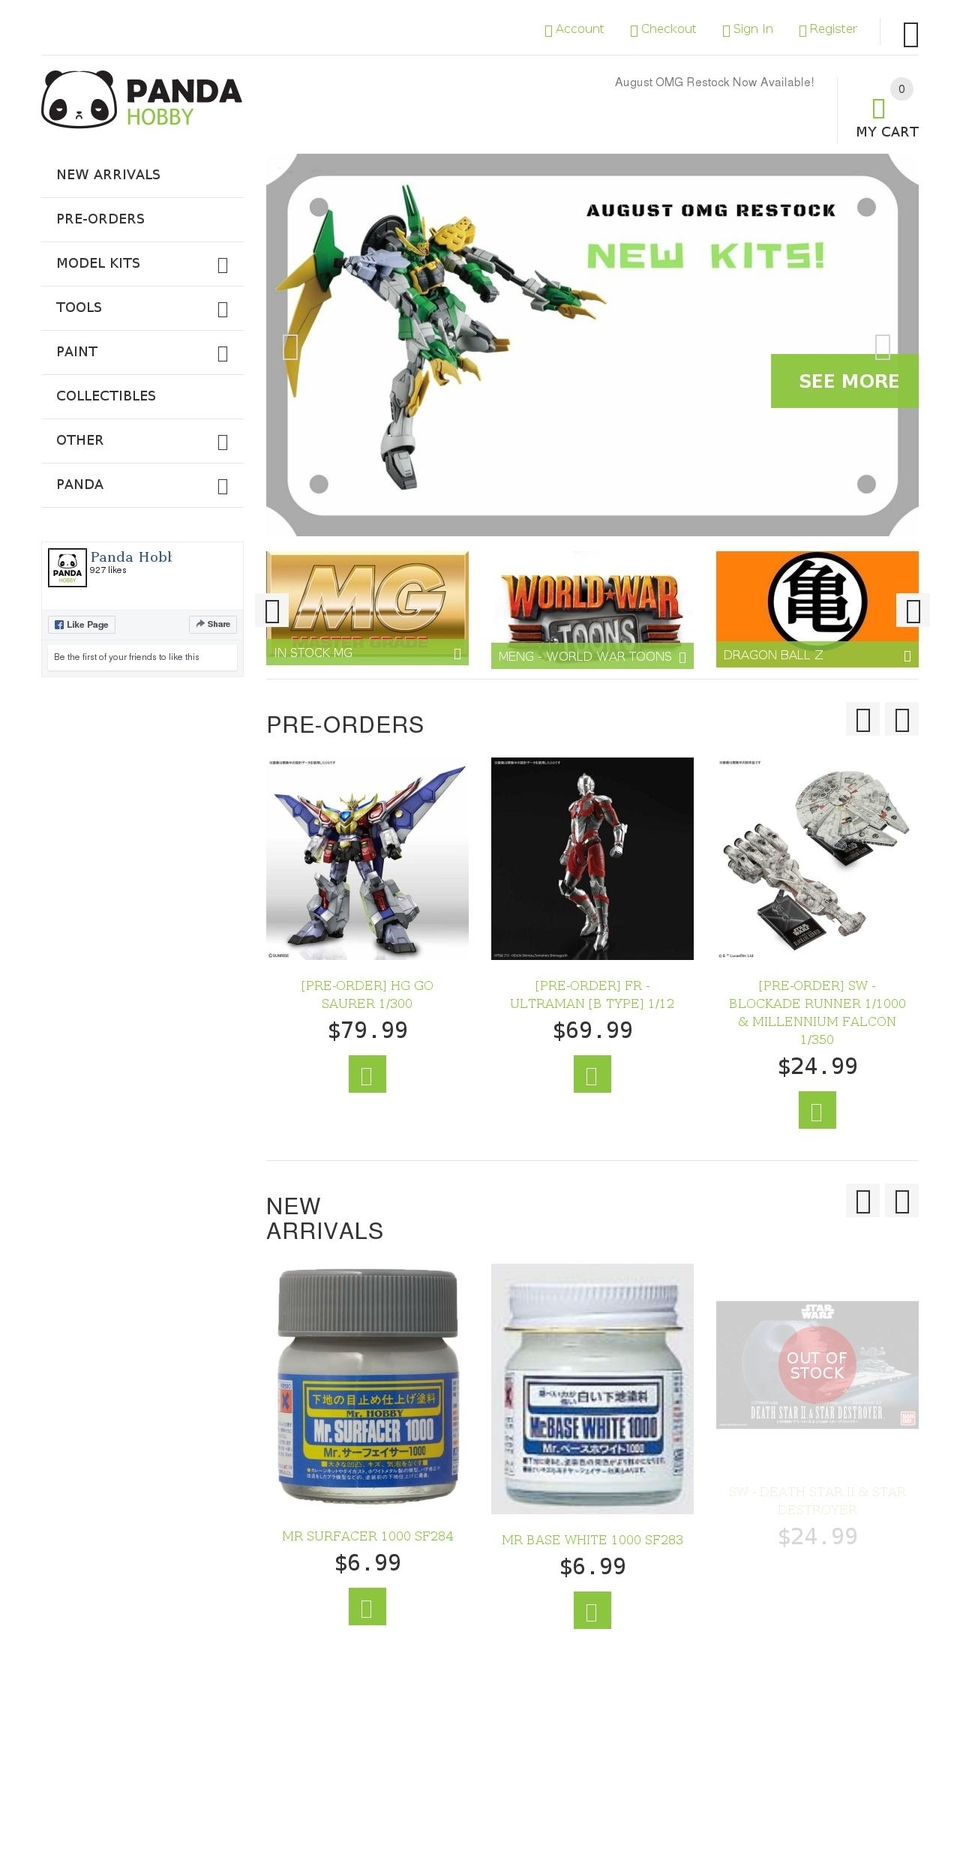 install-me-yourstore-v2-1-7 Shopify theme site example pandahobby.store